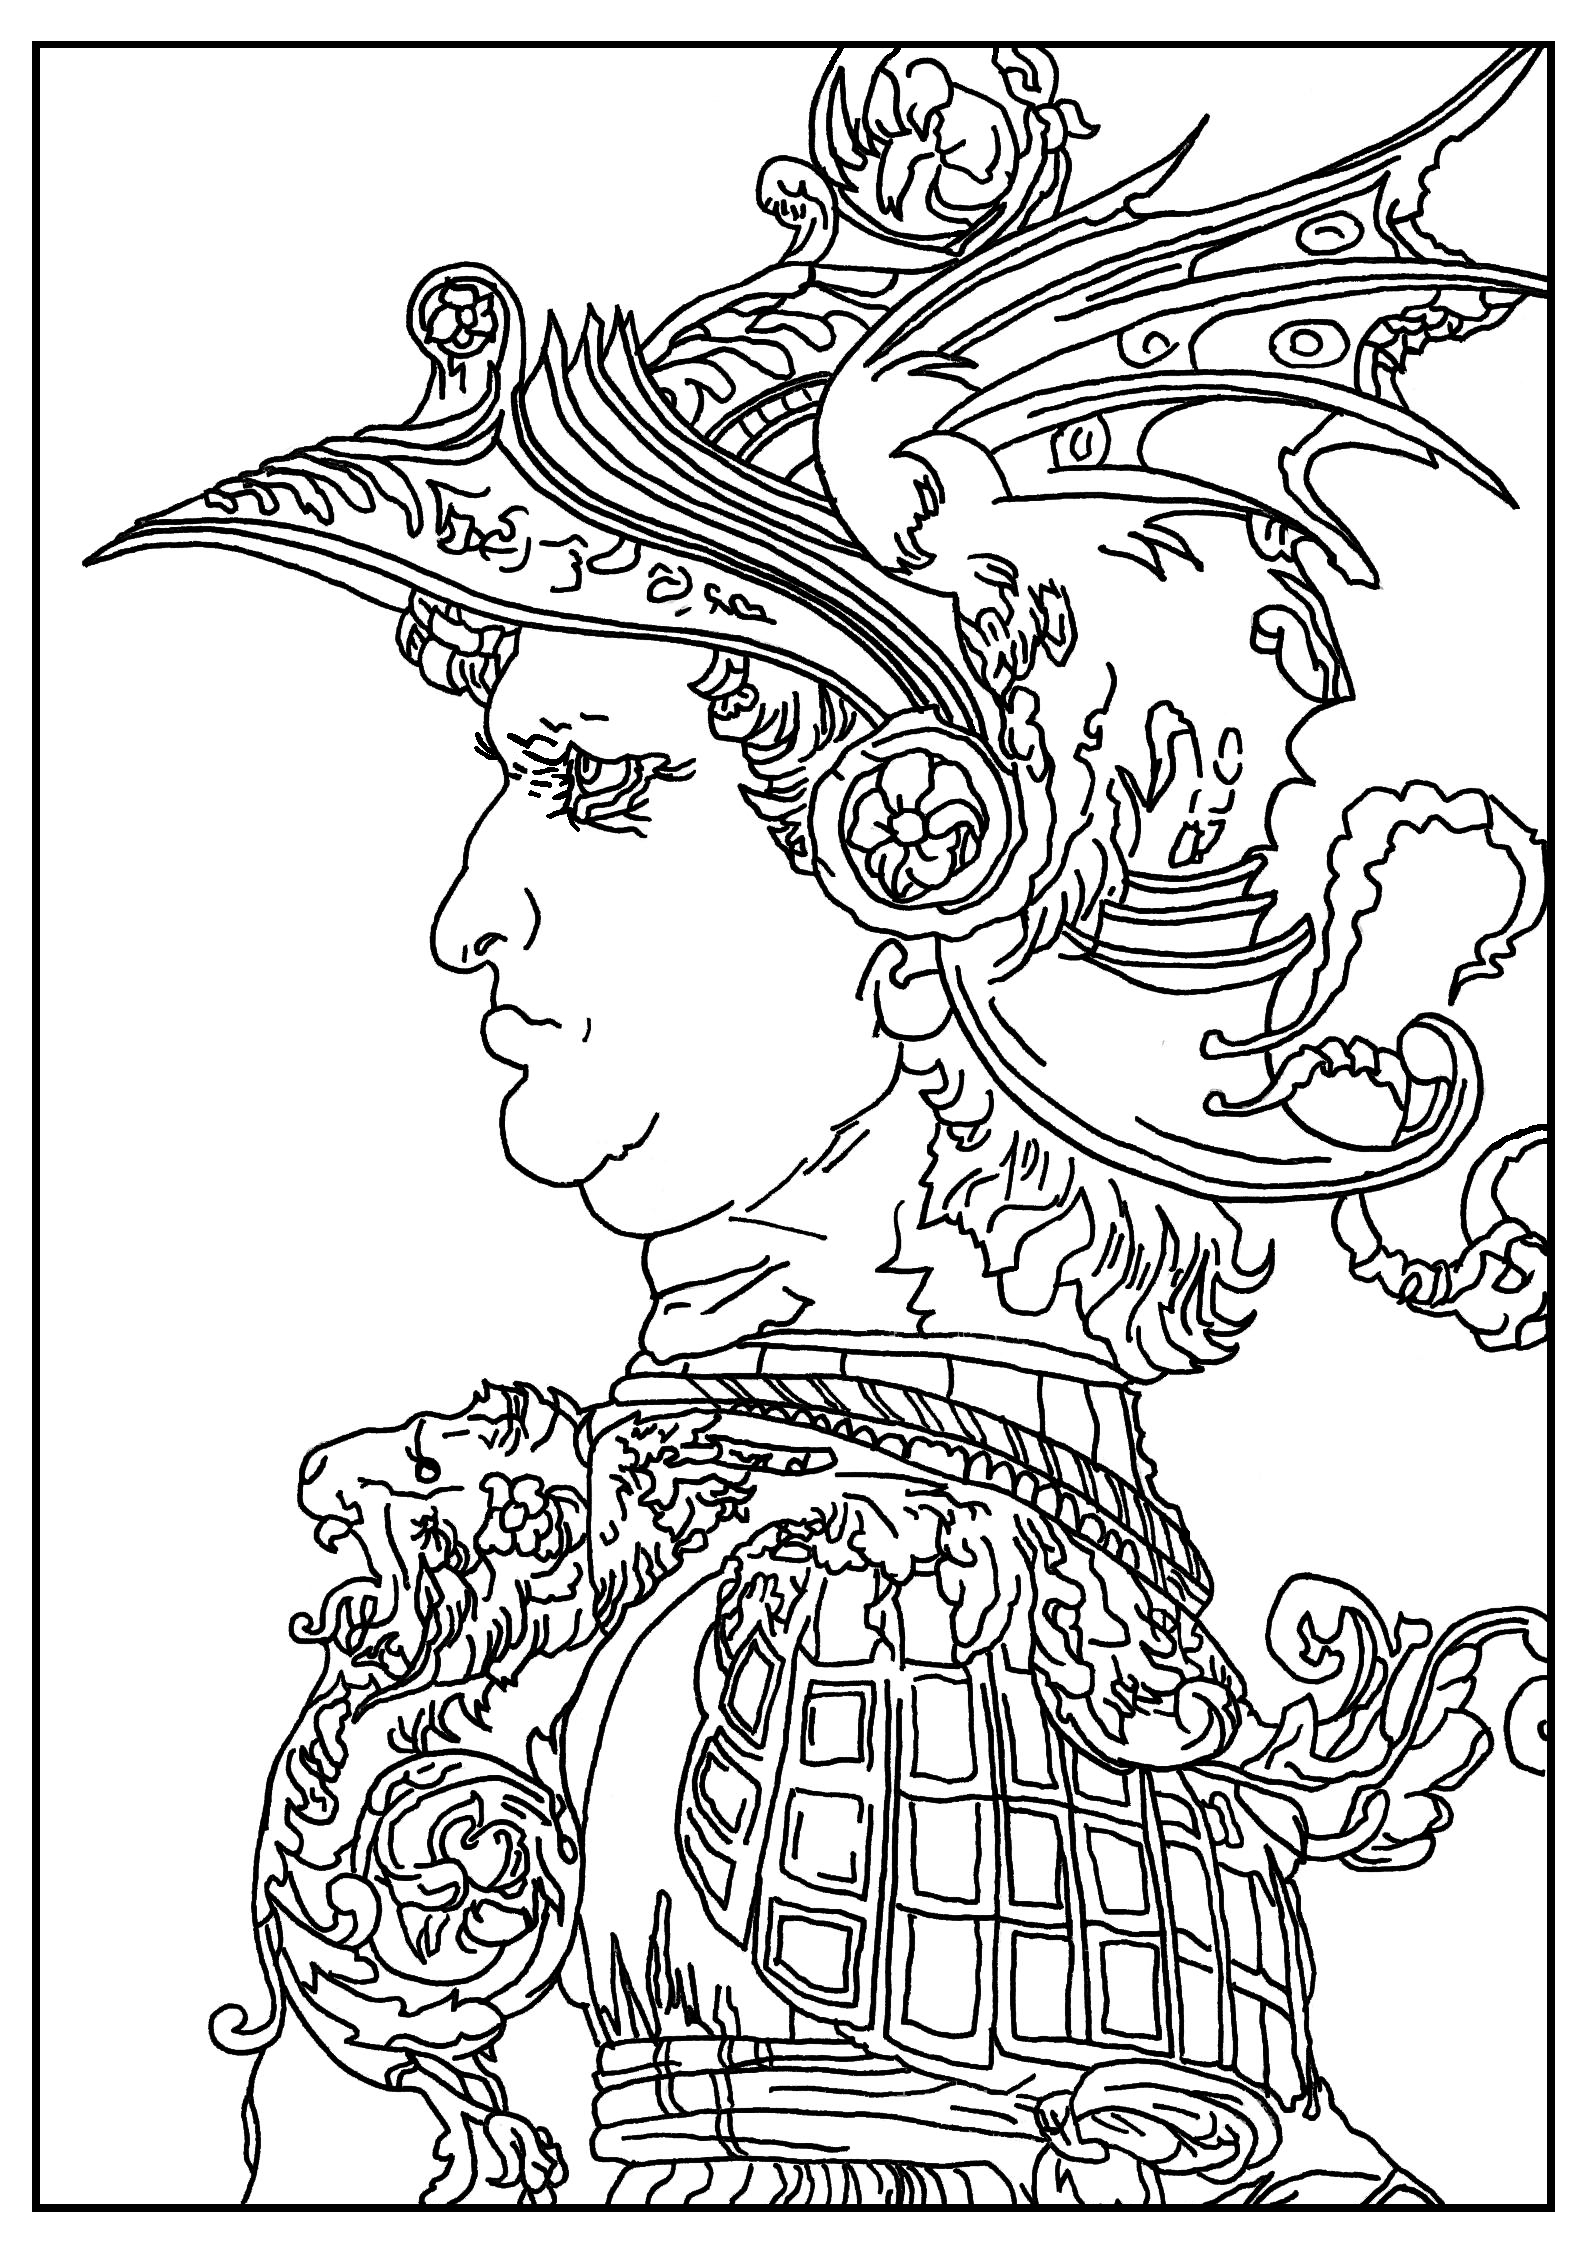 Coloring page created from a drawing by Leonardo Da Vinci : Profile of a warrior in helmet (1477), Artist : Sofian